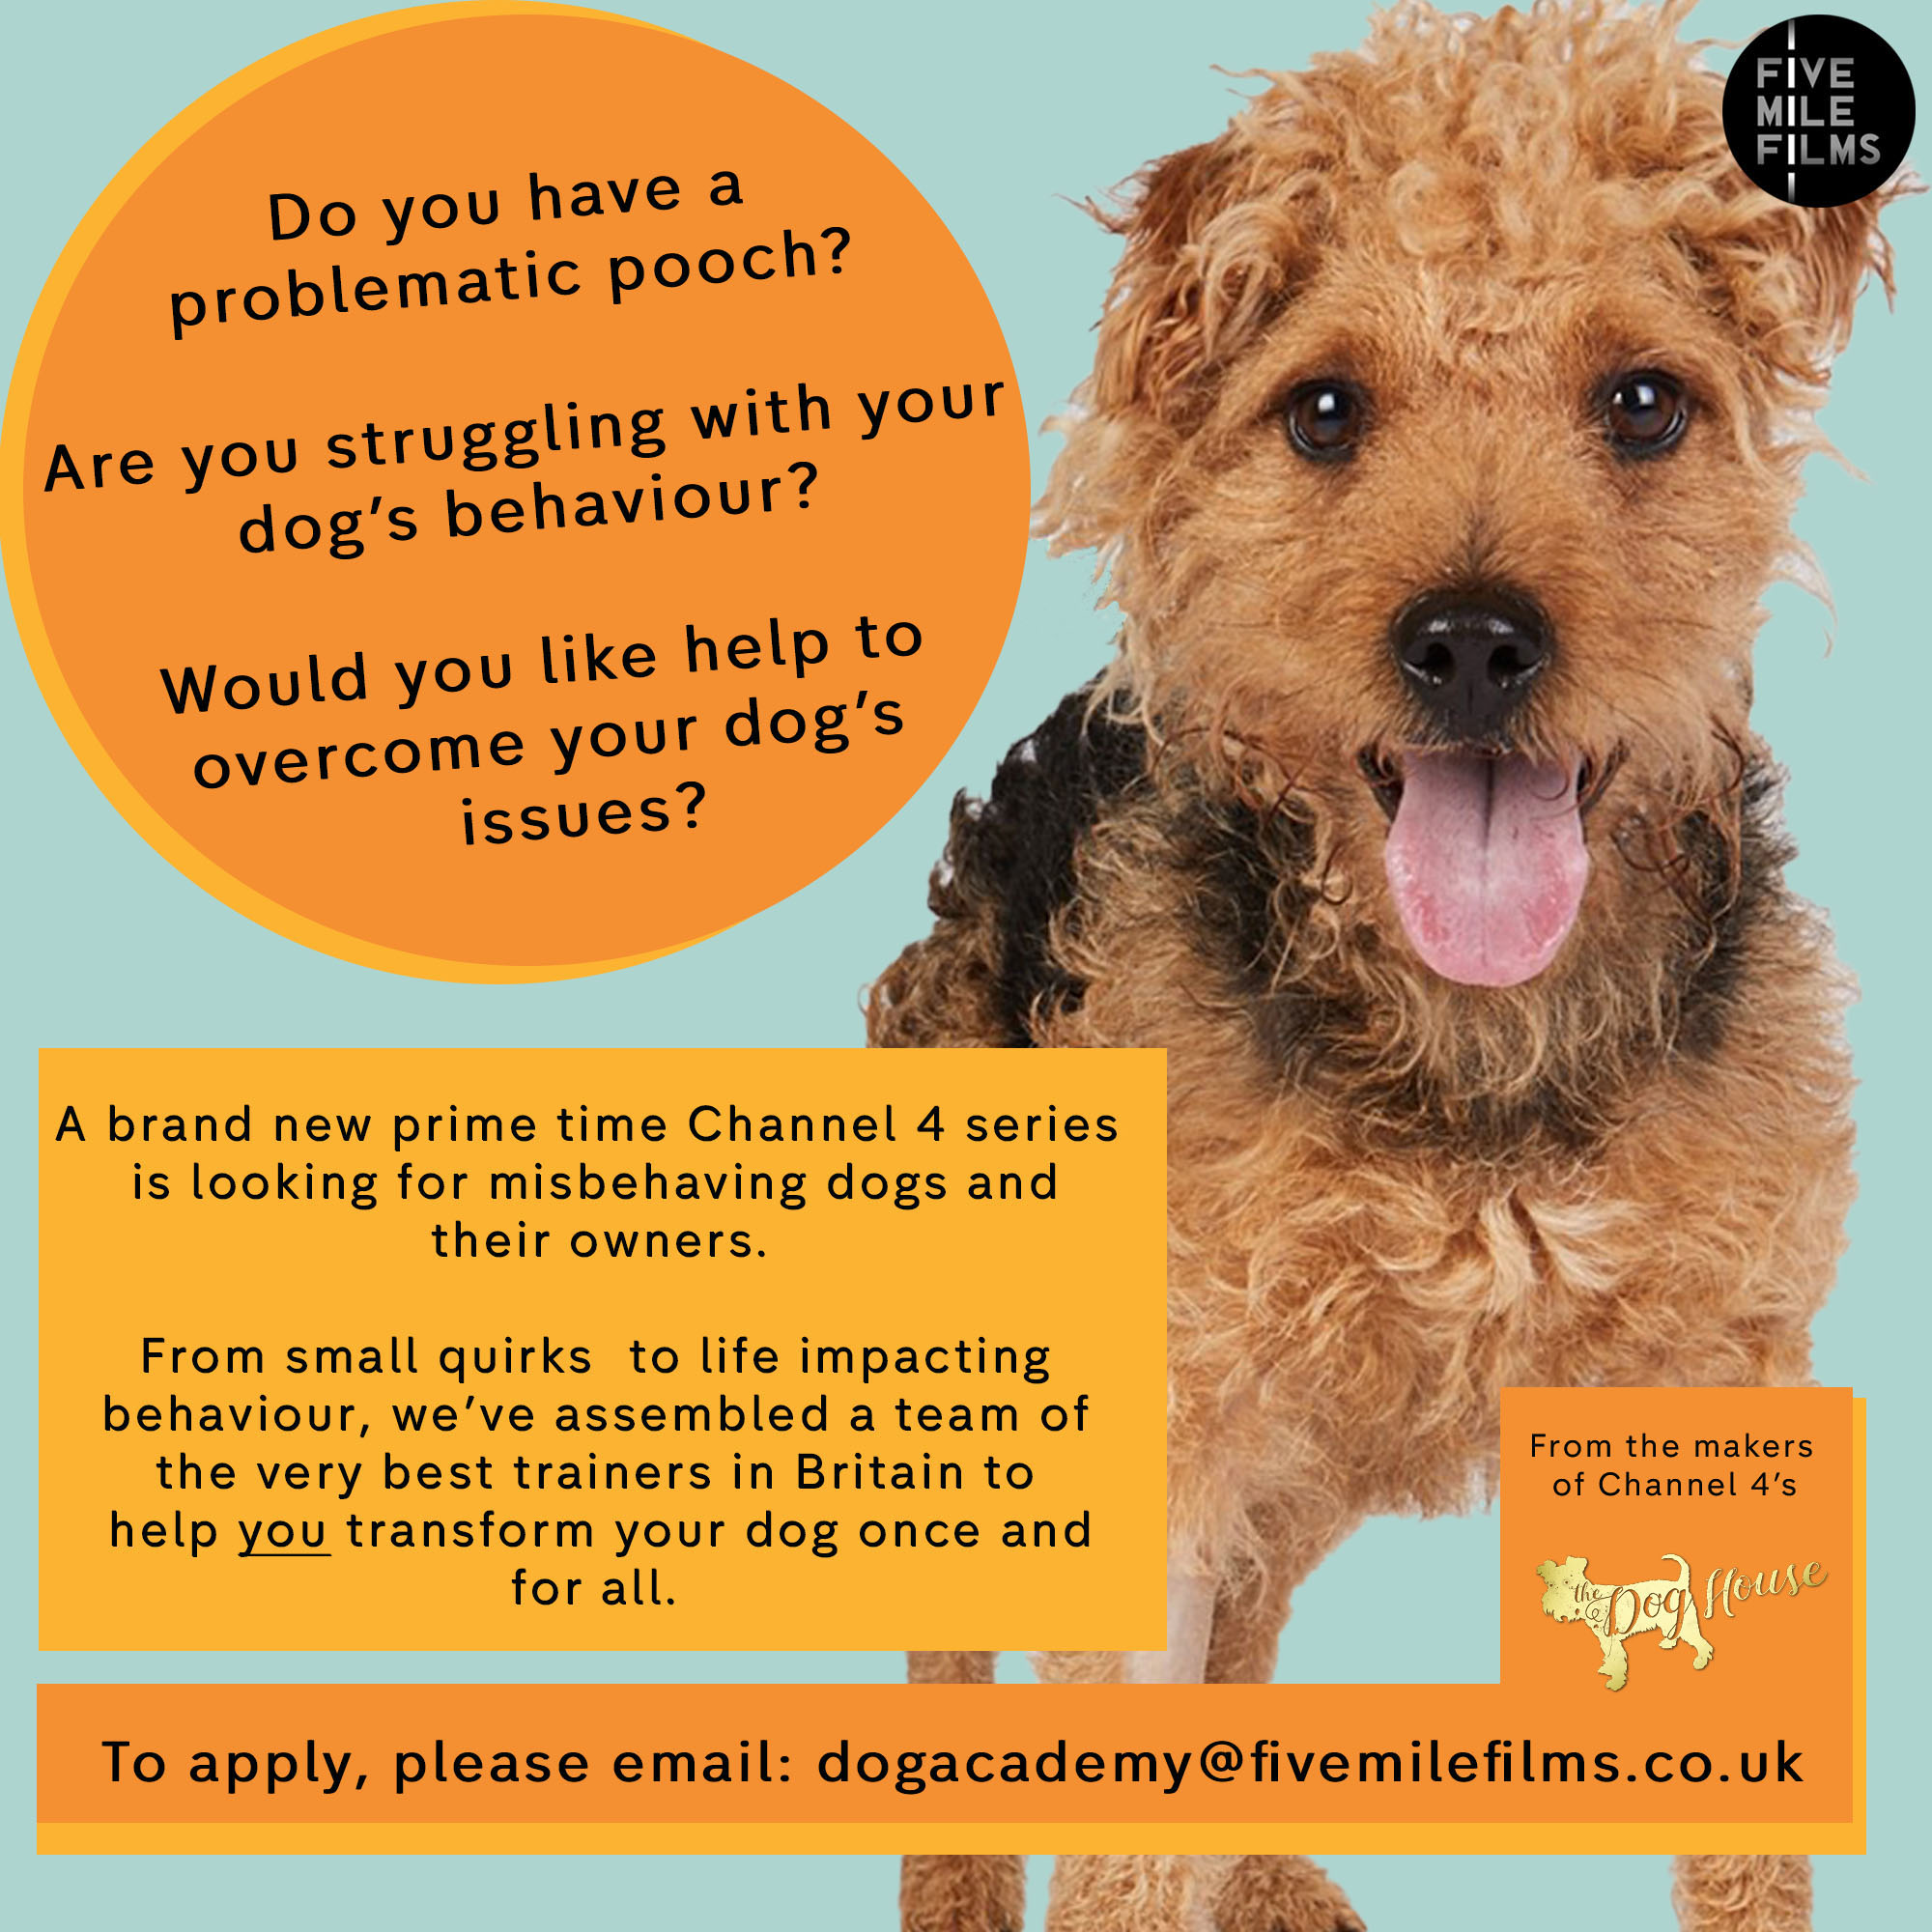 Do you have a problematic pooch? Are you struggling with your dog's behaviour? Would you like help to overcome your dog's issues? A brand new prime time channel 4 series is looking for misbehaving dogs and their owners. From small quirks, to life impacting behaviours, we've assembled a team of the very best trainers in Britain to help you transform your dog once and for all. To apply, please email: dogacademy@fivemilefilms.co.uk. From the makers of Dog House.